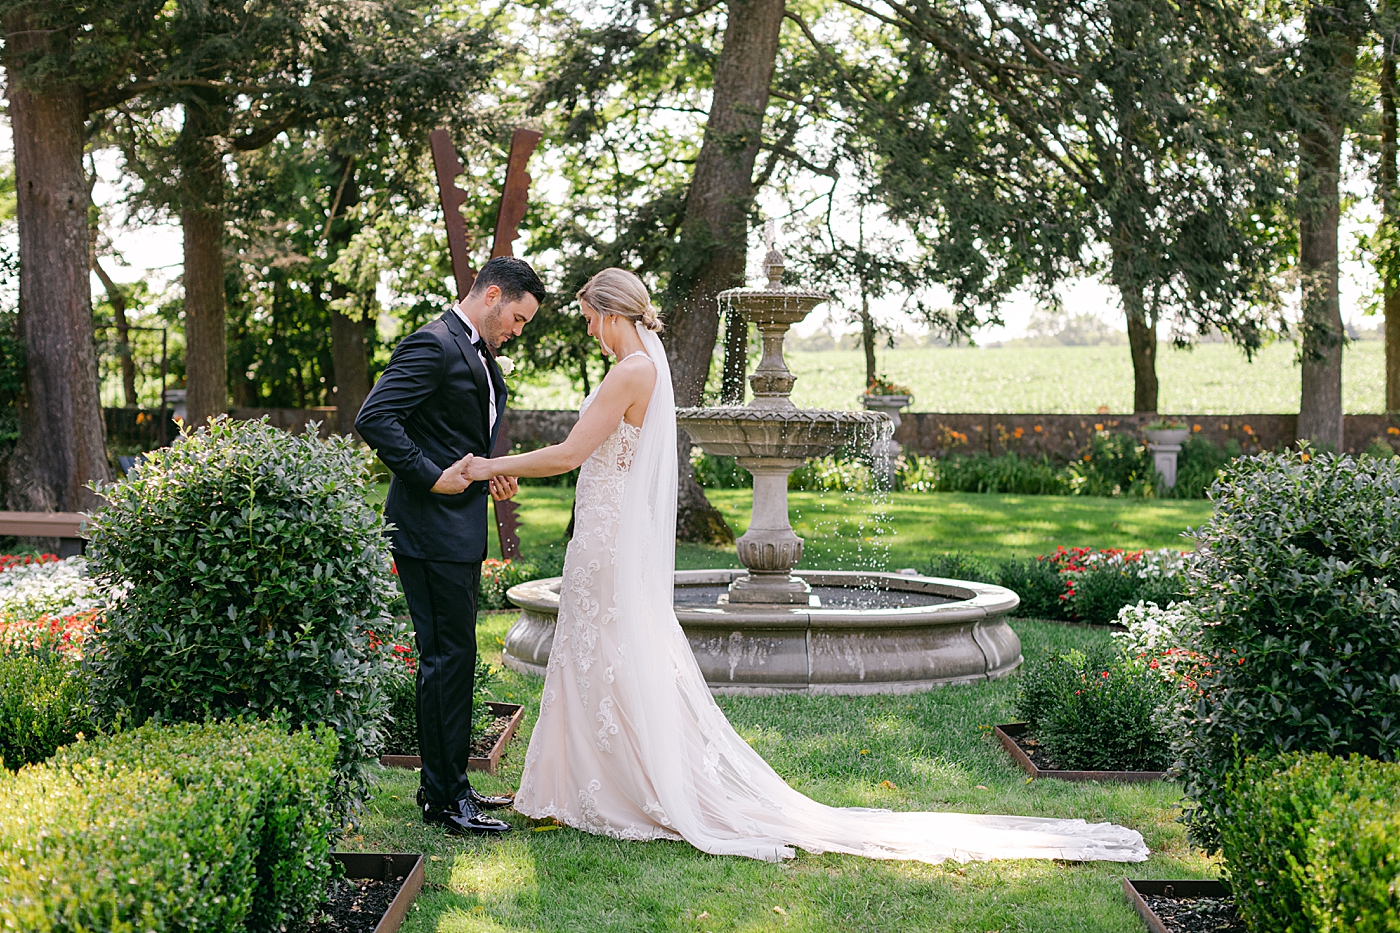 Bride and groom first look | Image by Hope Helmuth Photography